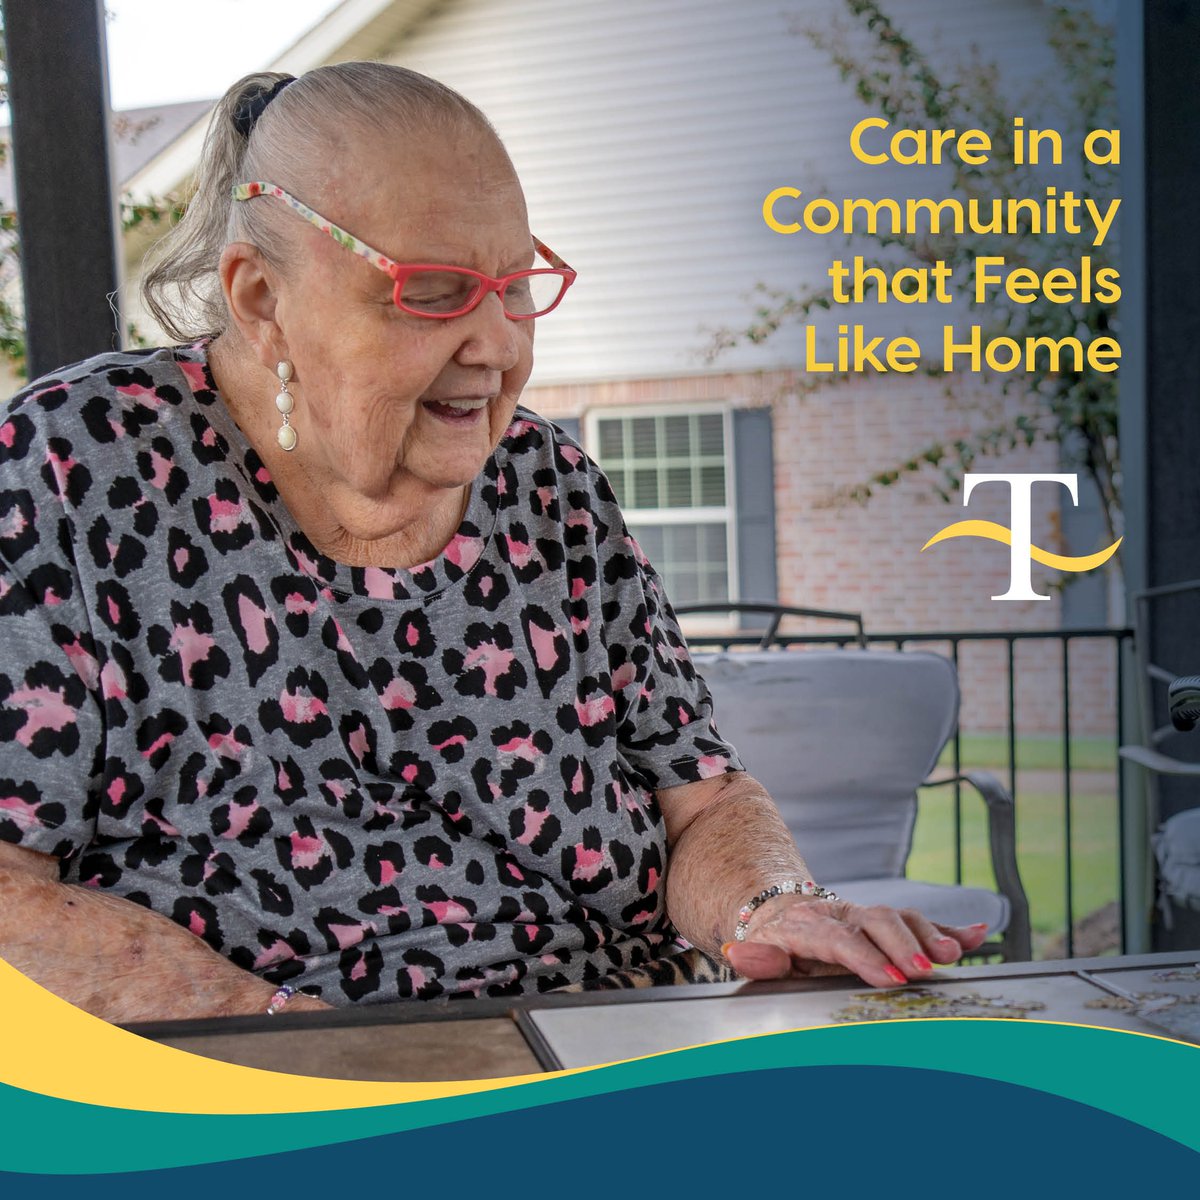 We believe our long-term care residents should feel at home in Touchstone Communities. We offer 24/7 skilled nursing care that prioritizes comfort for our residents.  Learn more: touchstone-communities.com/services/long-… 

#TouchstoneExperience #LongTermCare